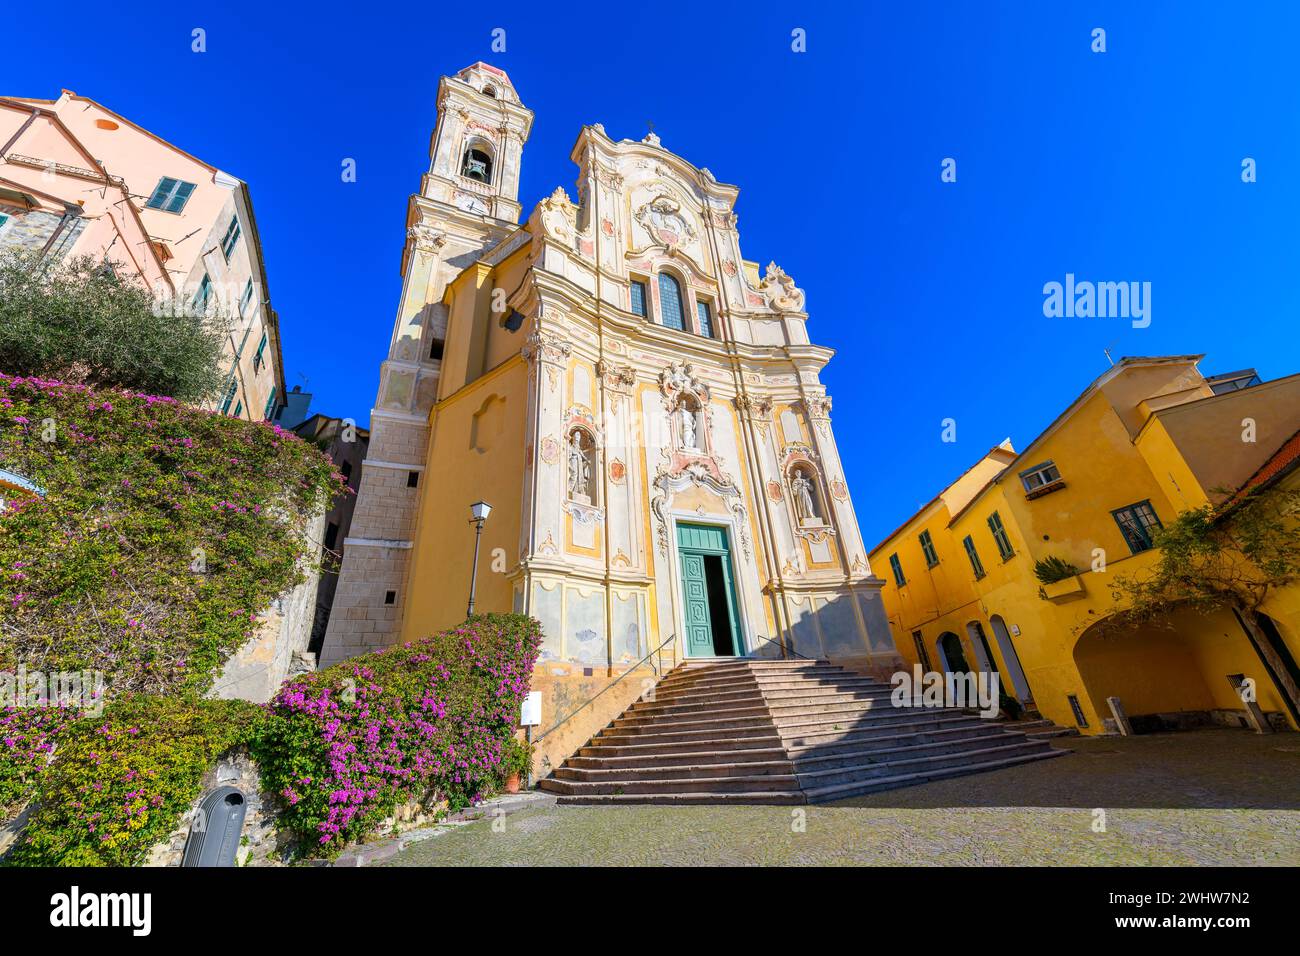 The 17th century Church of San Giovanni Battista rising above the medieval hill town of Cervo, Italy, in the Ligurian region of Northwest Italy. Stock Photo